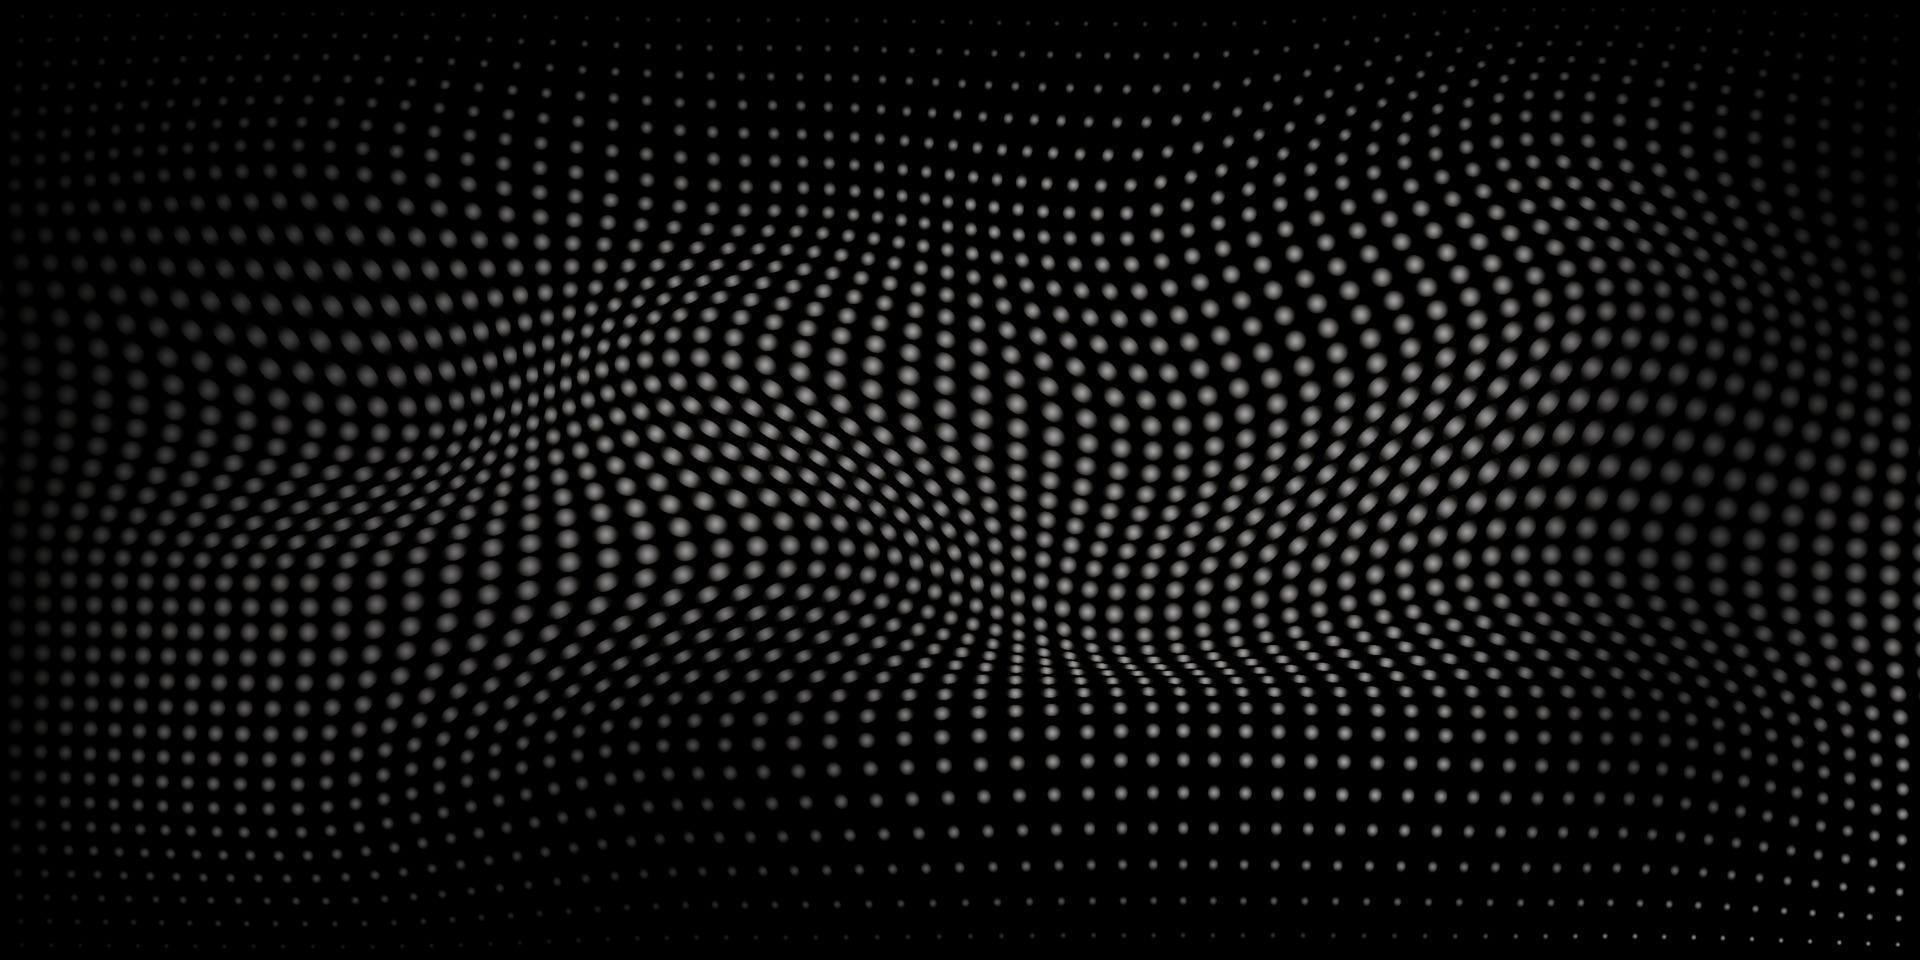 Futuristic Digital Wave of Particles on Dark Black Background. Wave Halftone Dark Black Pattern. Template with Dots Optical Illusion. Abstract Modern Design. Vector Illustration.